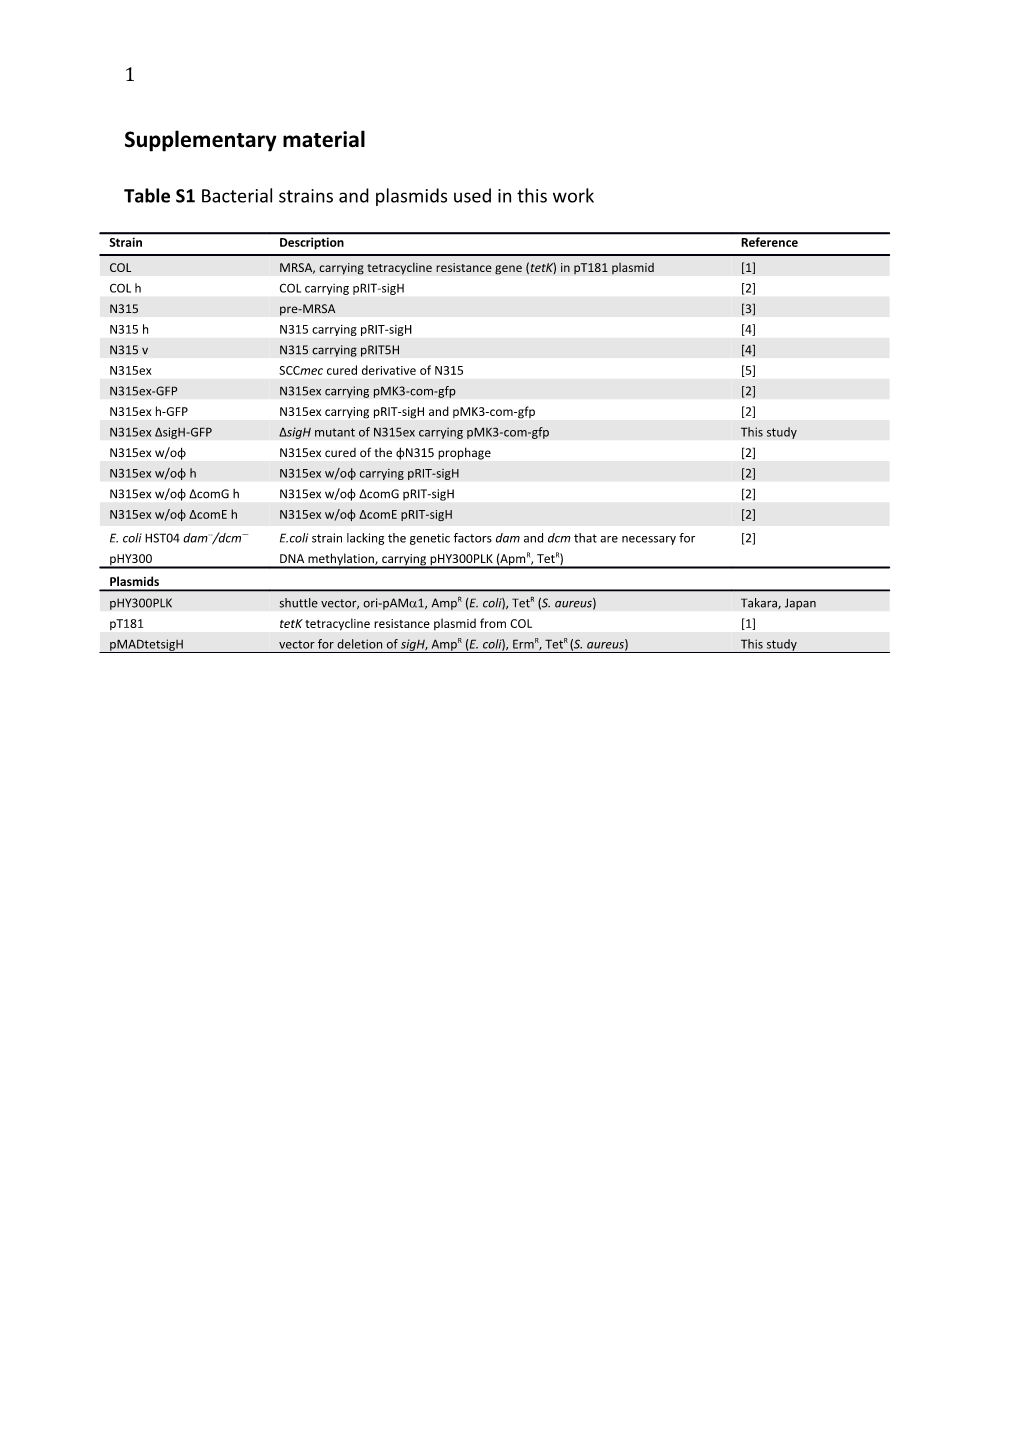 Table S1 Bacterial Strains and Plasmids Used in This Work